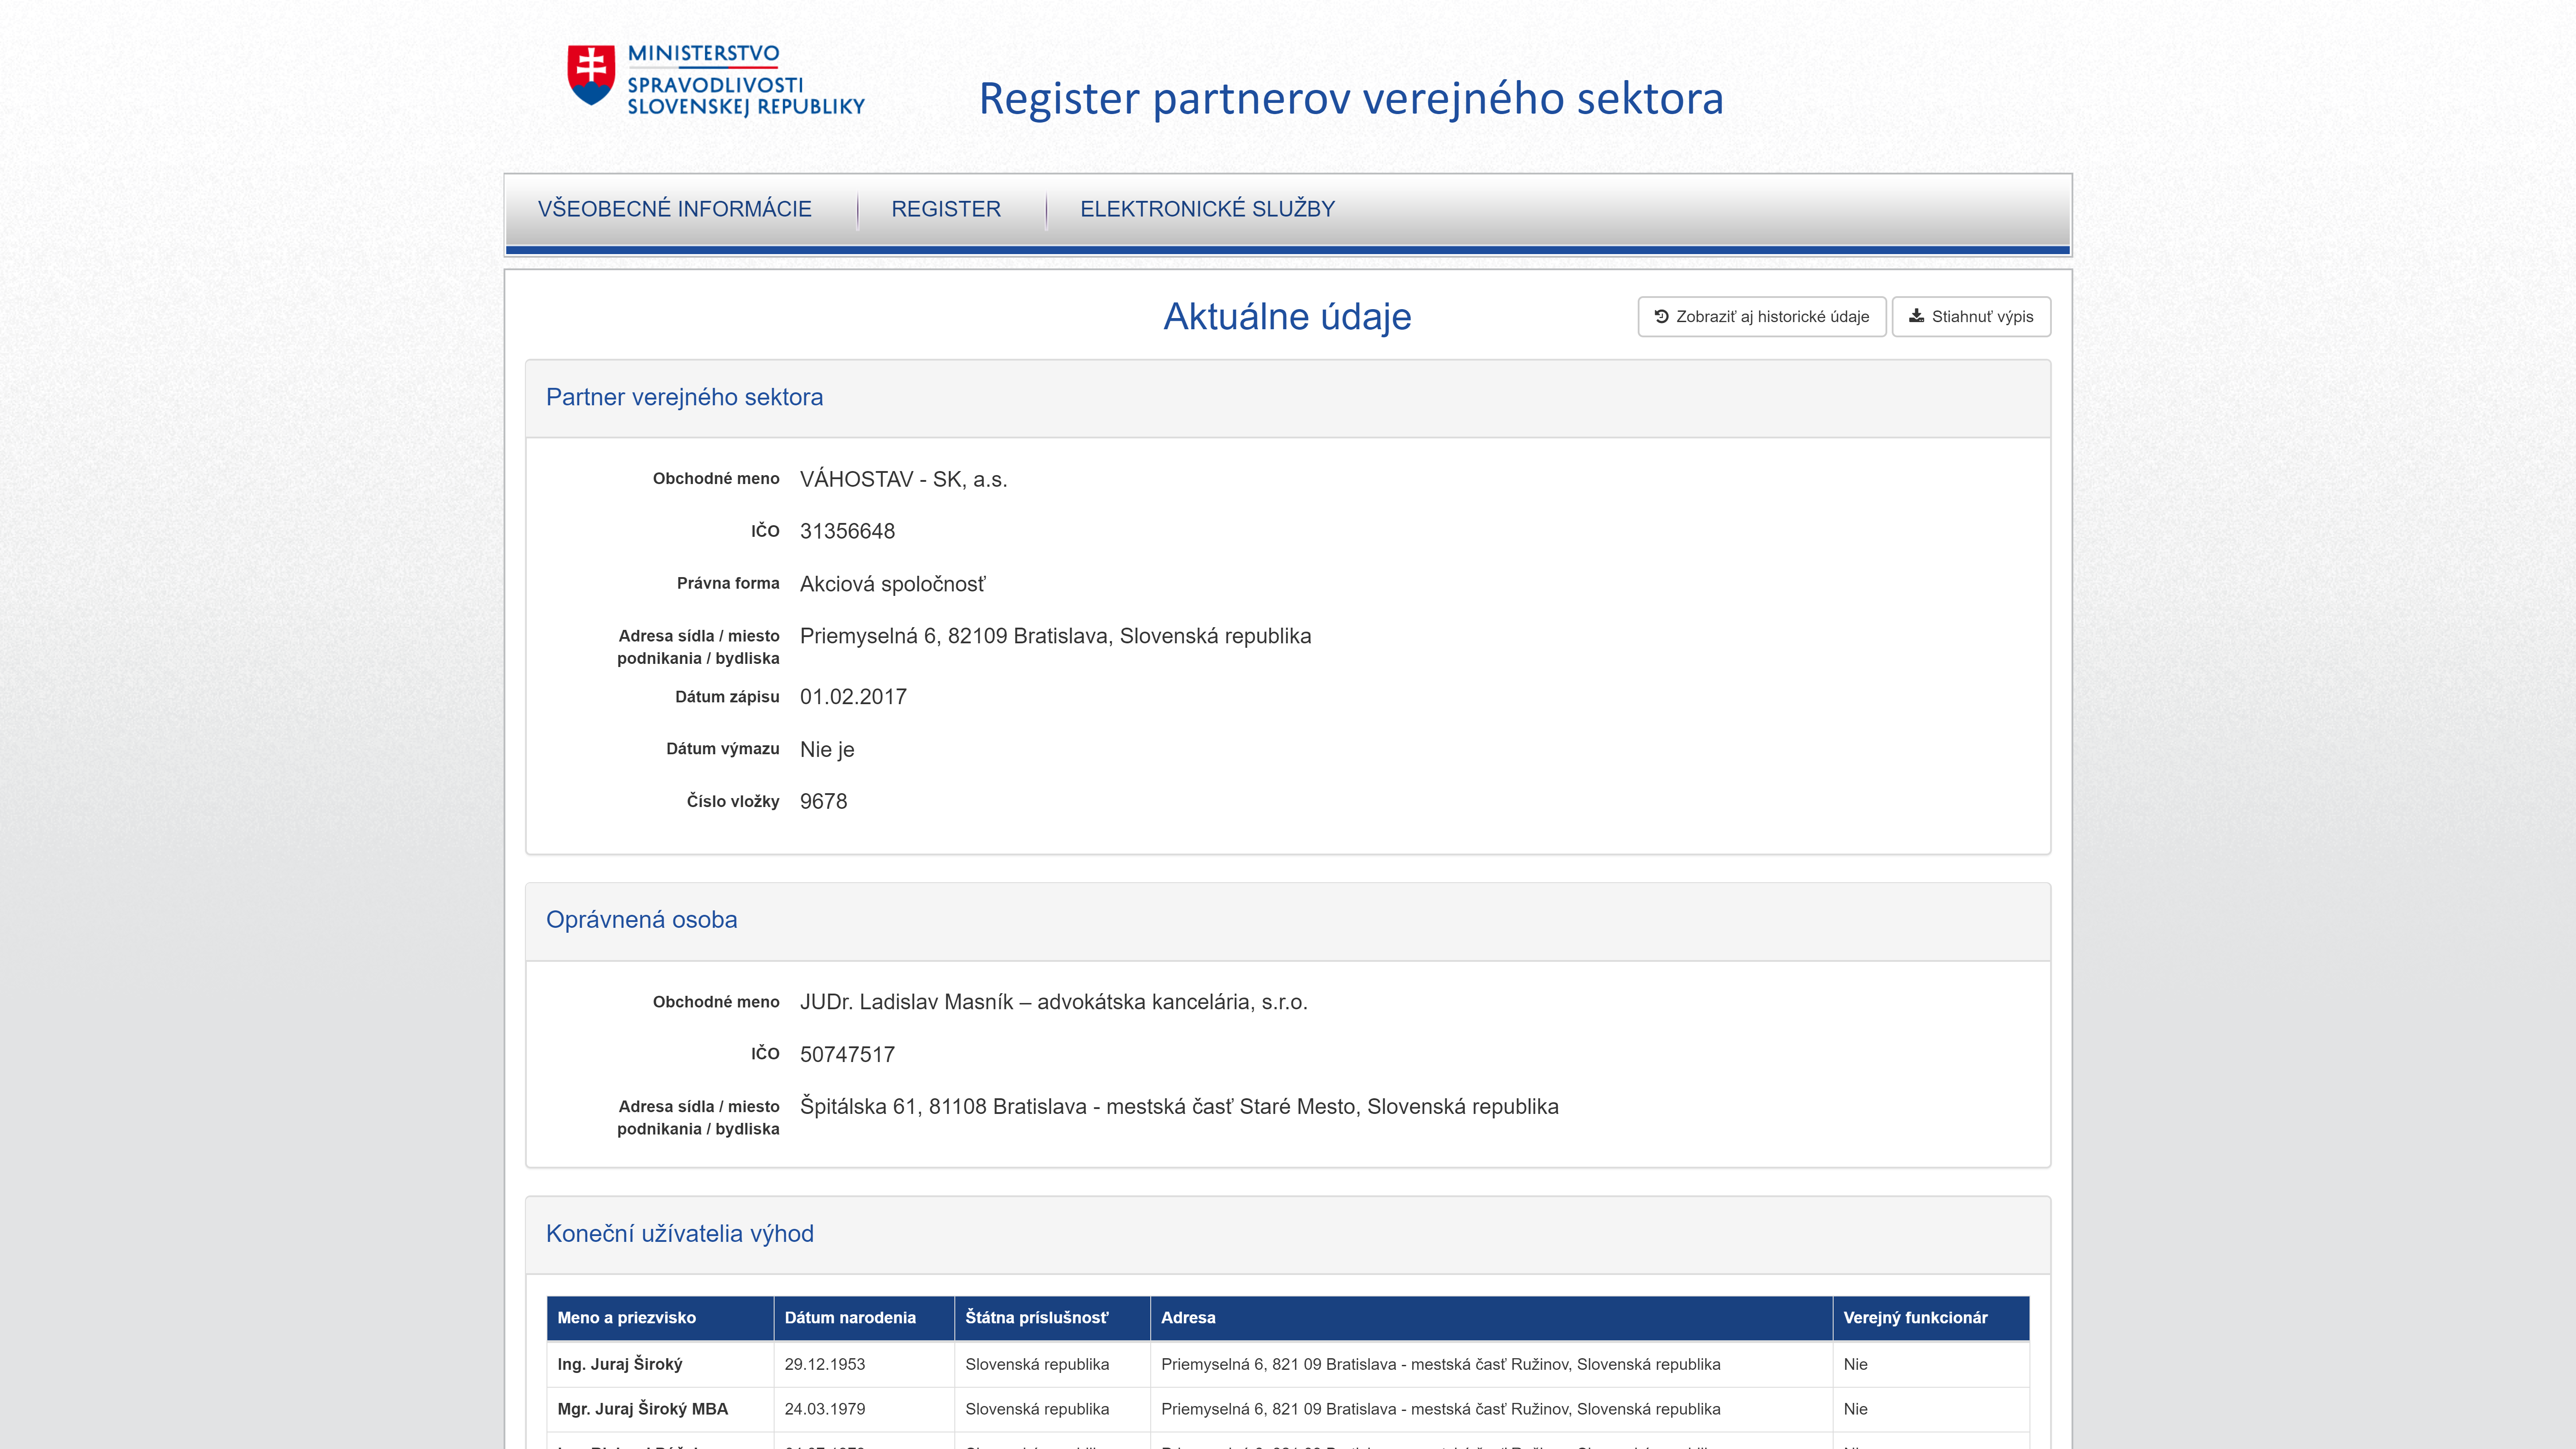 Slovakia's Register of Public Sector Partners